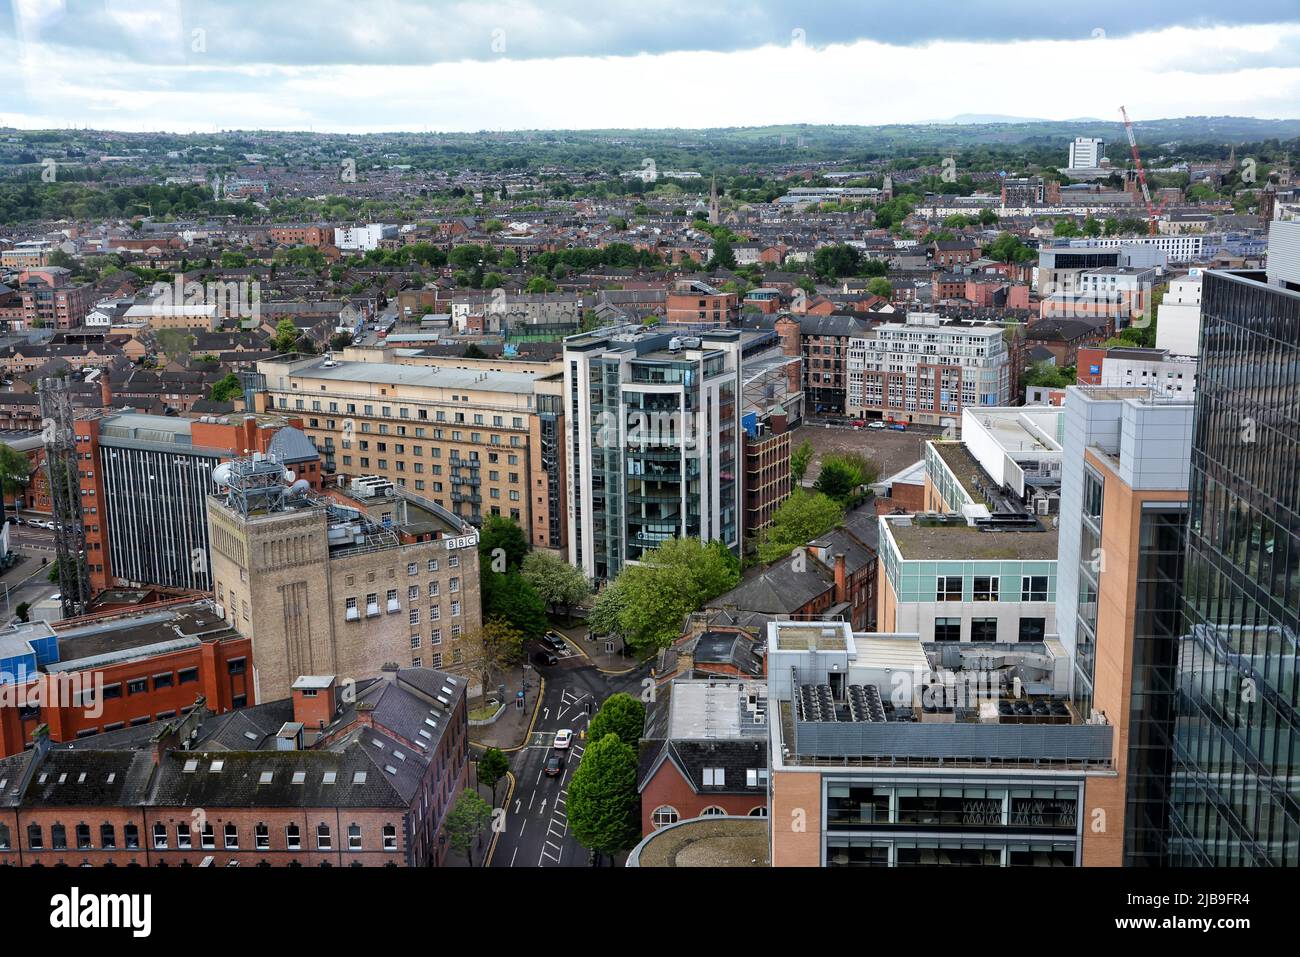 vBelfast, United Kingdom - 20 May 2022: Aerial view of the city with BBC palace in the foreground from a skyscraper, Belfast Stock Photo